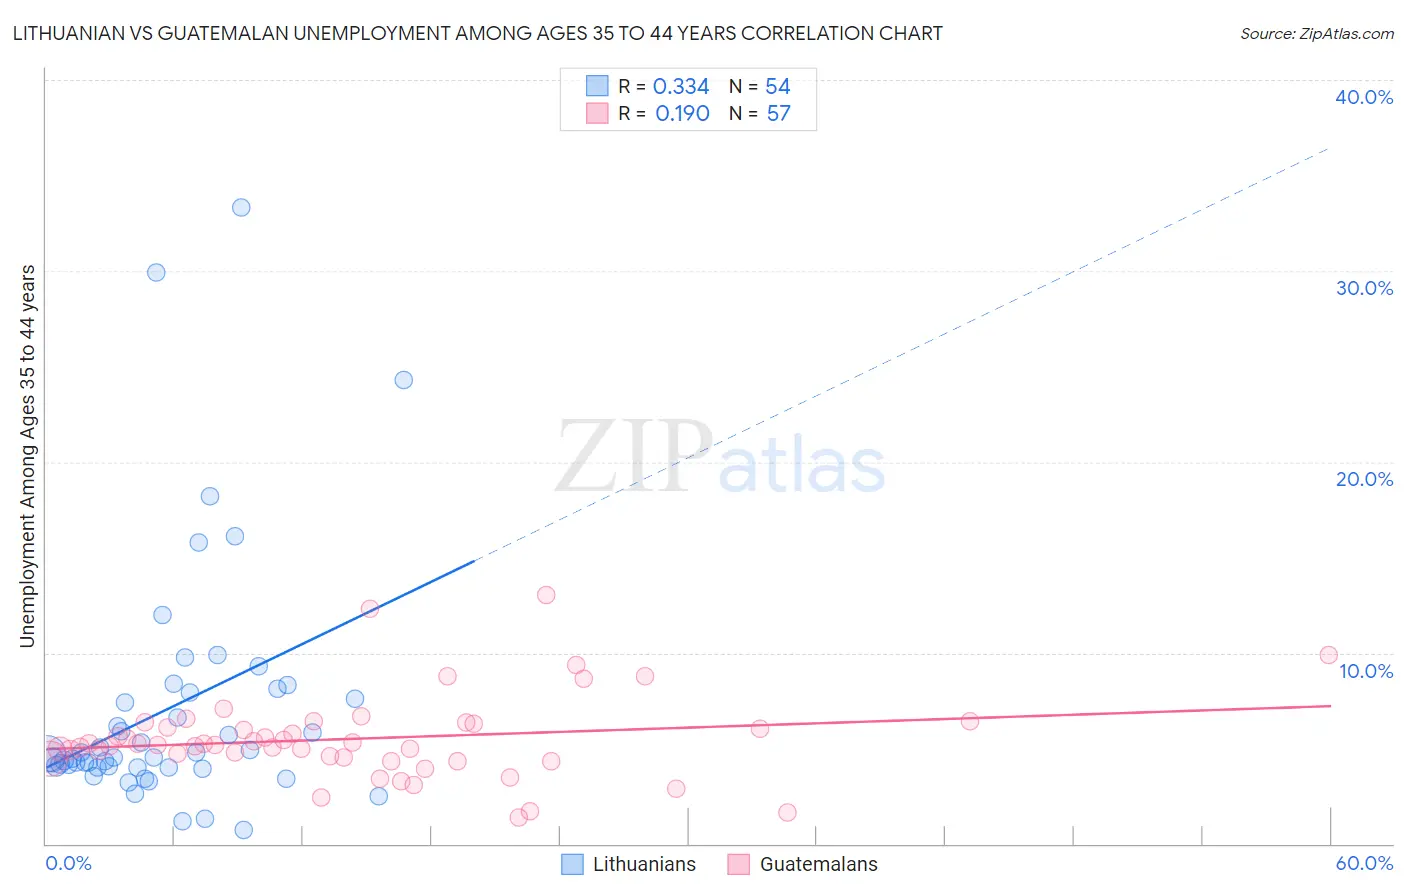 Lithuanian vs Guatemalan Unemployment Among Ages 35 to 44 years